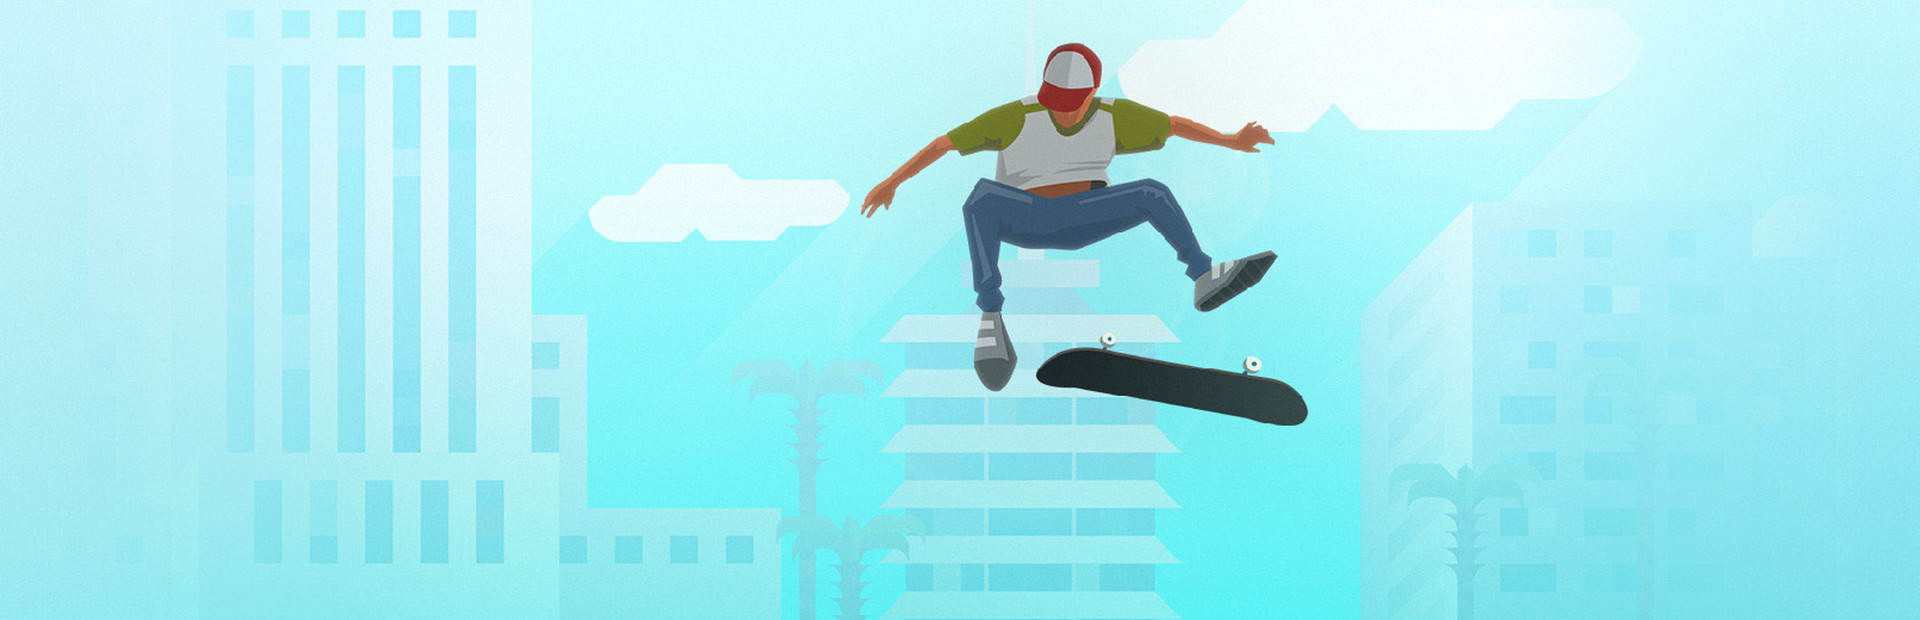 OlliOlli2: Welcome to Olliwood cover image